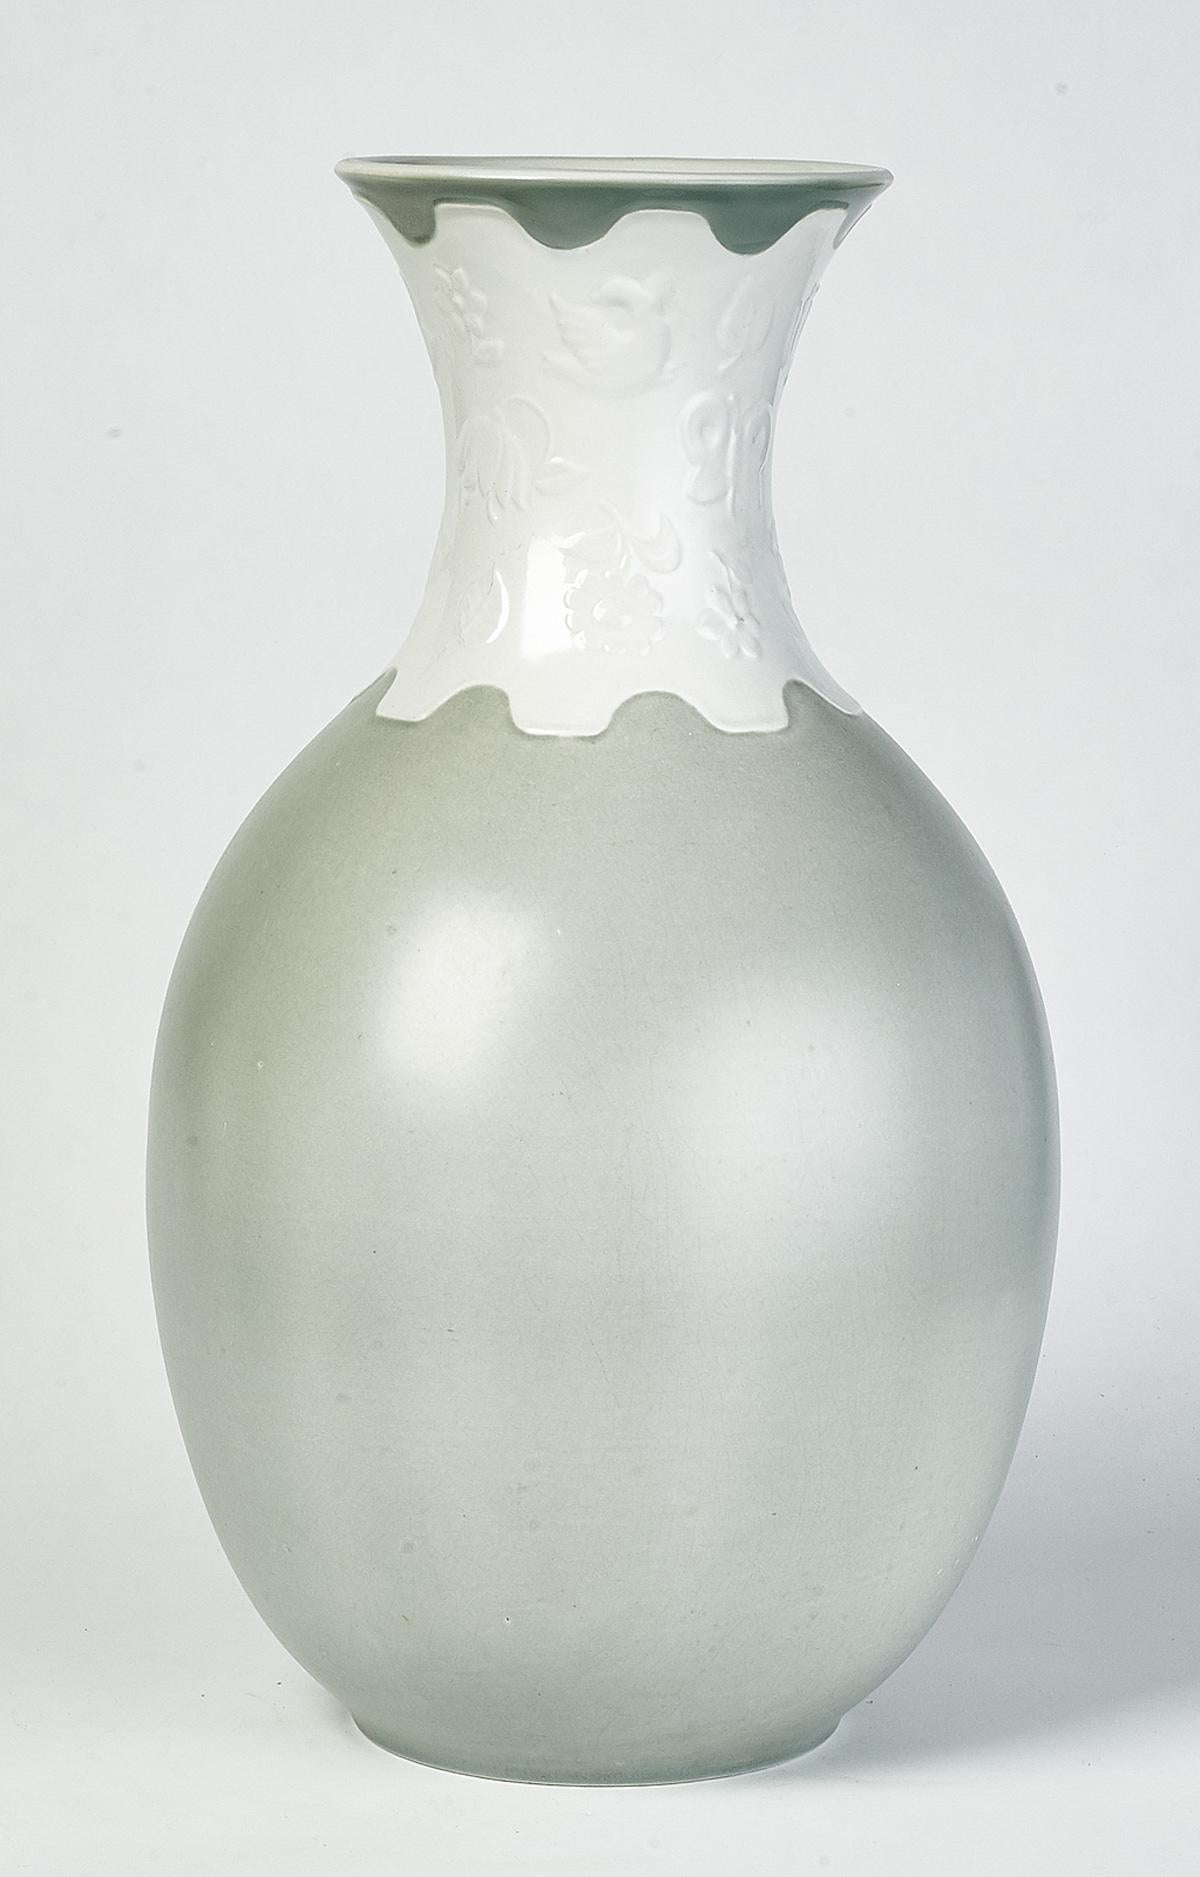 Giovanni Gariboldi (1908 - 1971) For Richard Ginori
An important ceramic vase by Giovanni Gariboldi for Richard Ginori in matte grey tones, the neck decorated with contrasting white gloss glazed bas reliefs of birds and butterflies and